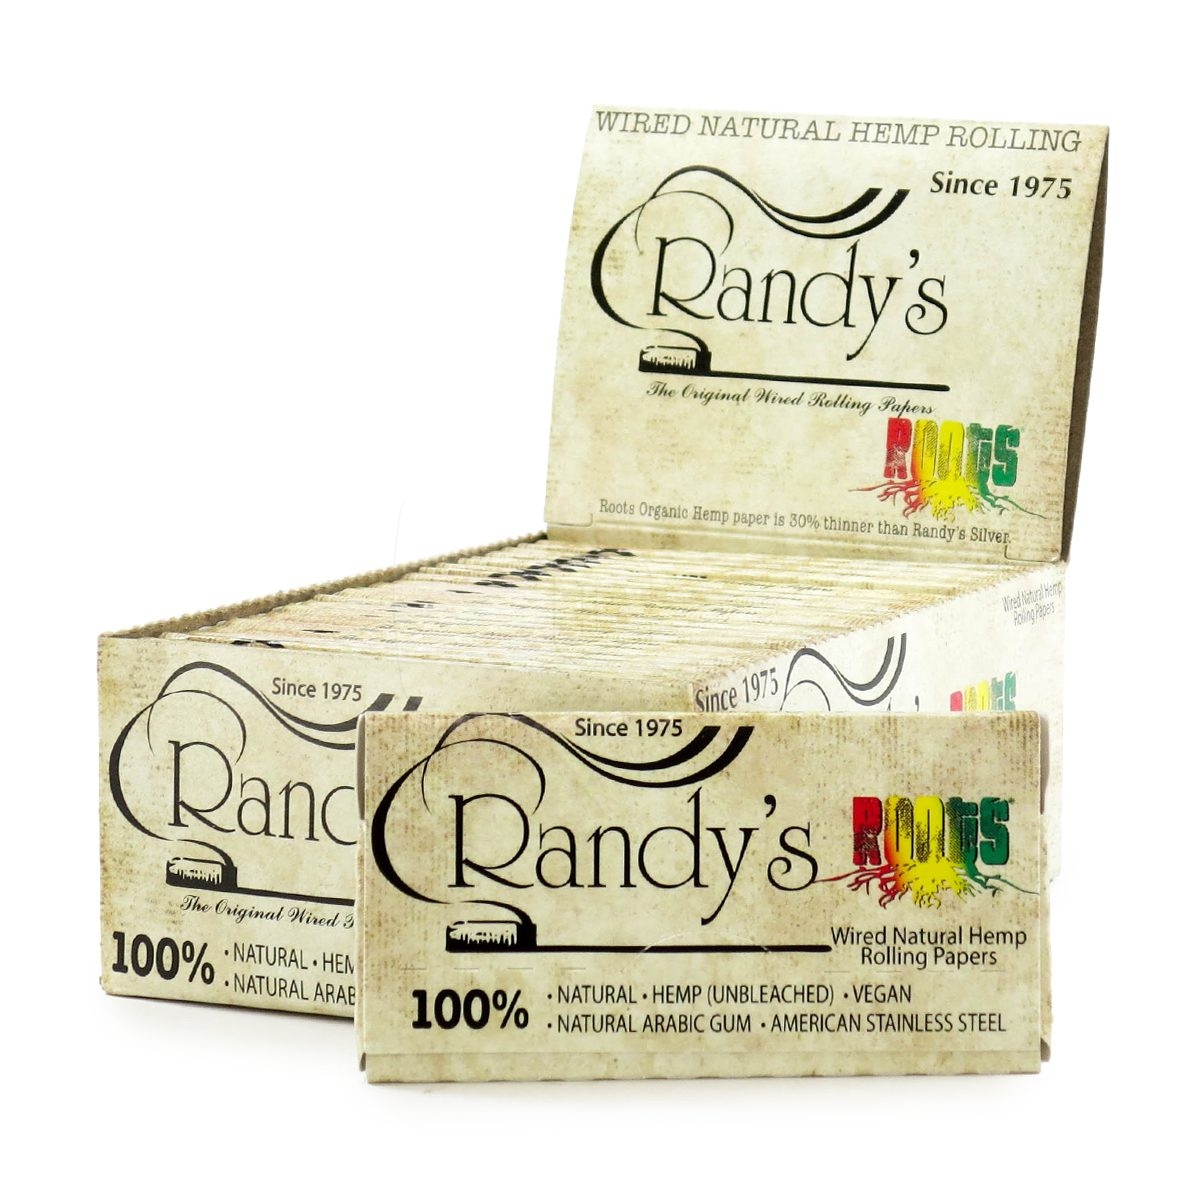 Randys Roots Hemp 1 1/4 Rolling Papers Box